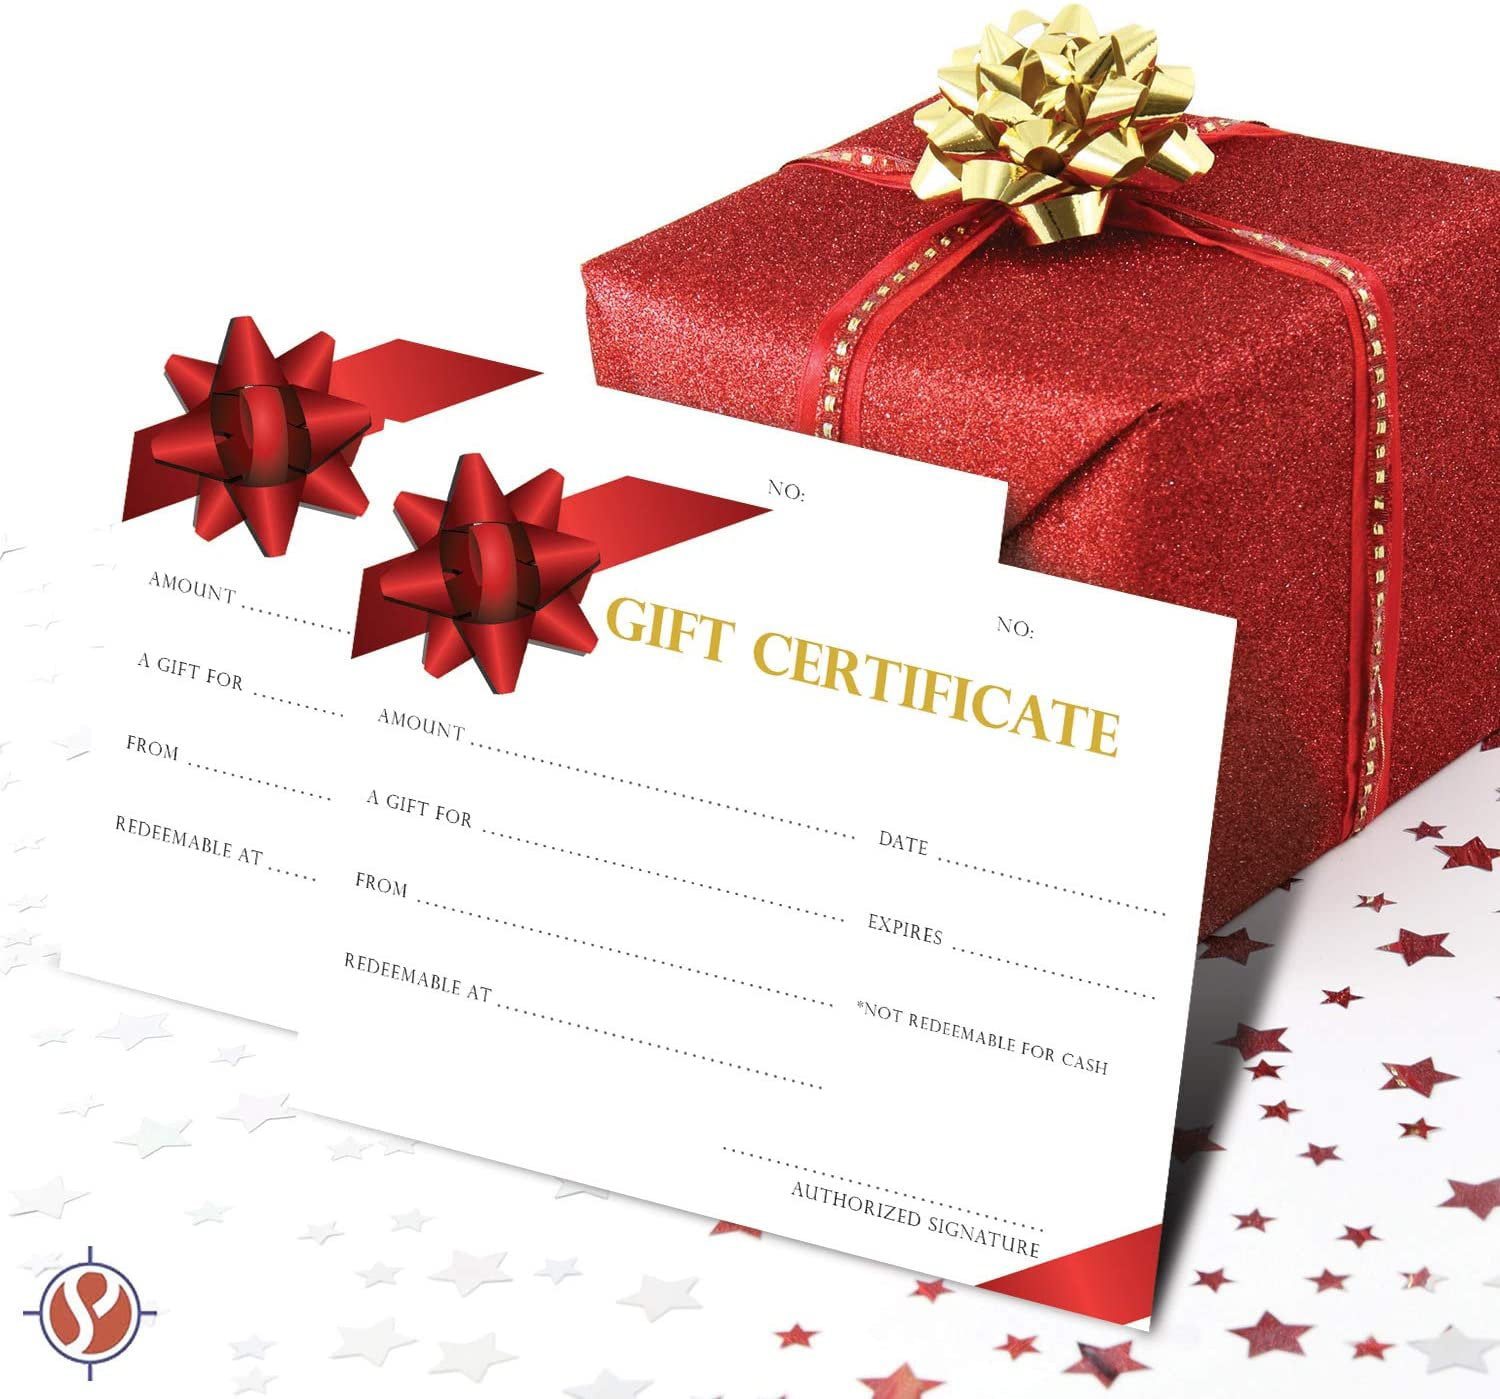 Sequential Numbering Printing-Spa,Eyelash Blank Gift Certificates 25set Makeup,Hair Beauty Salon,Restaurant,Small Business gift certificate for business,Comes with Free matching Envelopes 